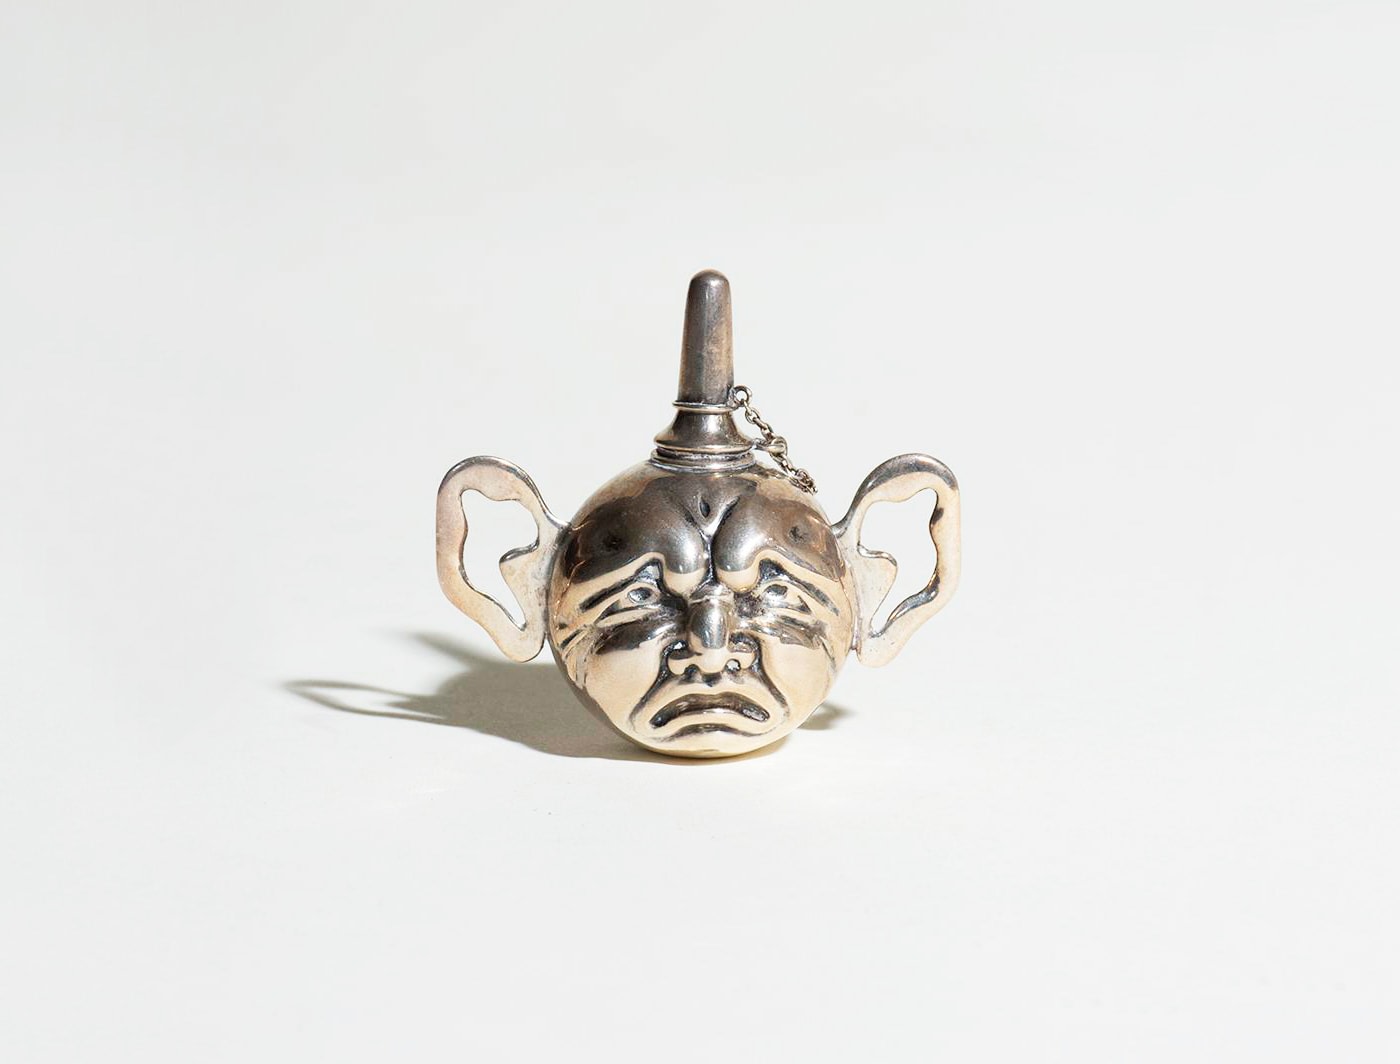 a small round old fashioned cigar lighter, the round body with relief decoration on either side of tragedy and comedy like faces, with ears for handles.